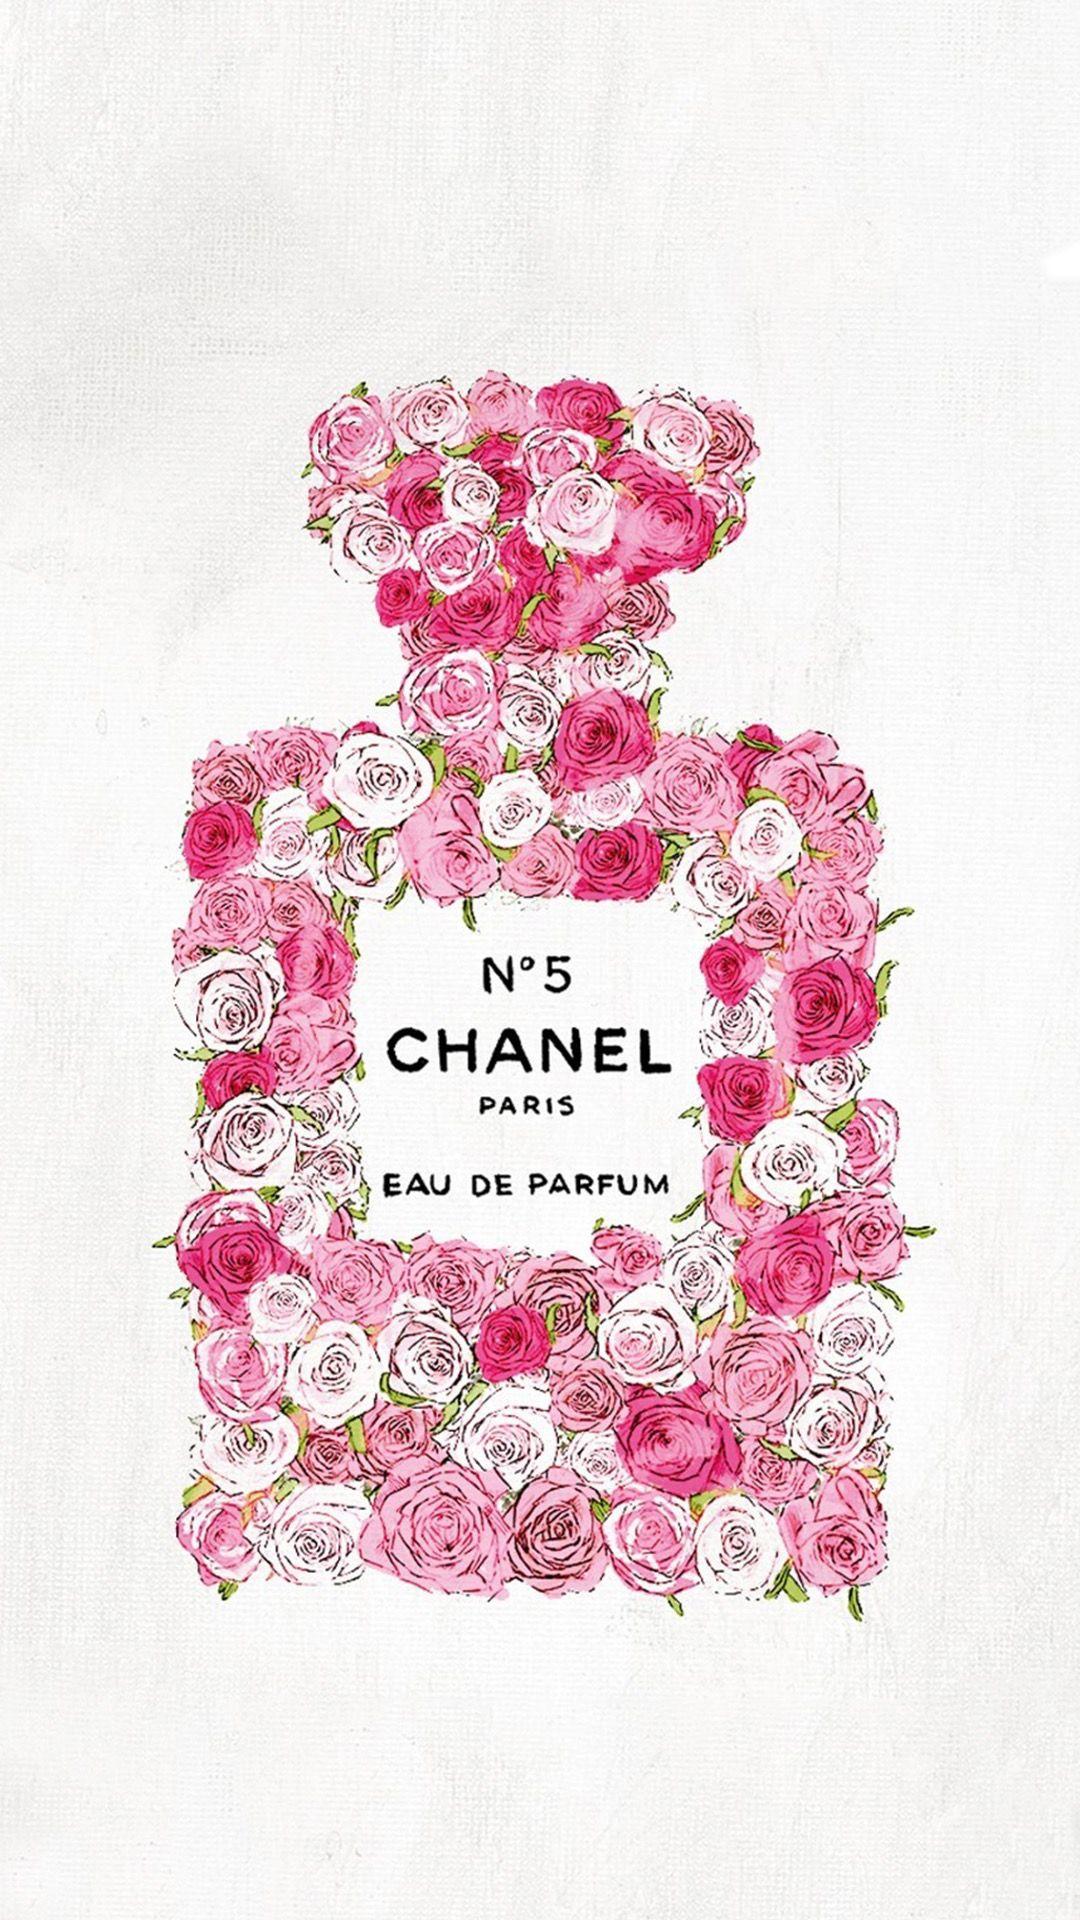 Pink Chanel Iphone Wallpaper